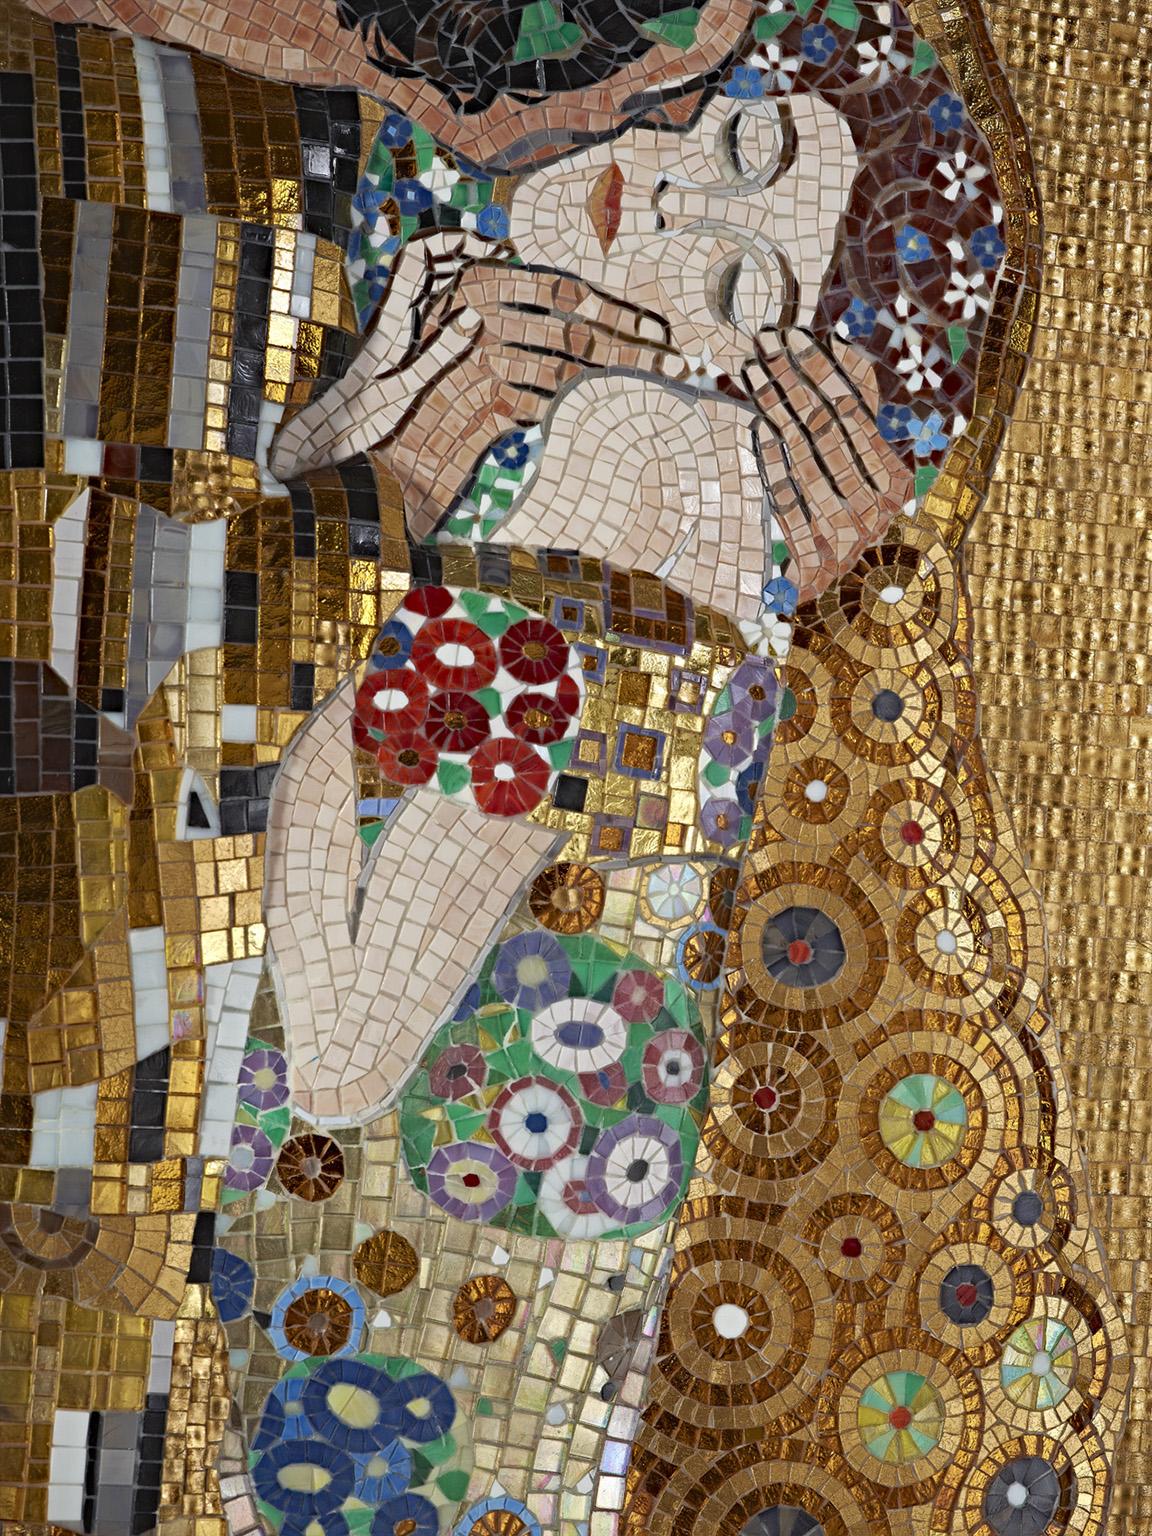 Making artistic mosaic, design of unparalleled beauty, inventing ' tromp l'oeil' thanks to the endless colors of the glass mosaic collections, all this allowed us to produce and divulge in all the world the preciousness of the mosaic as an